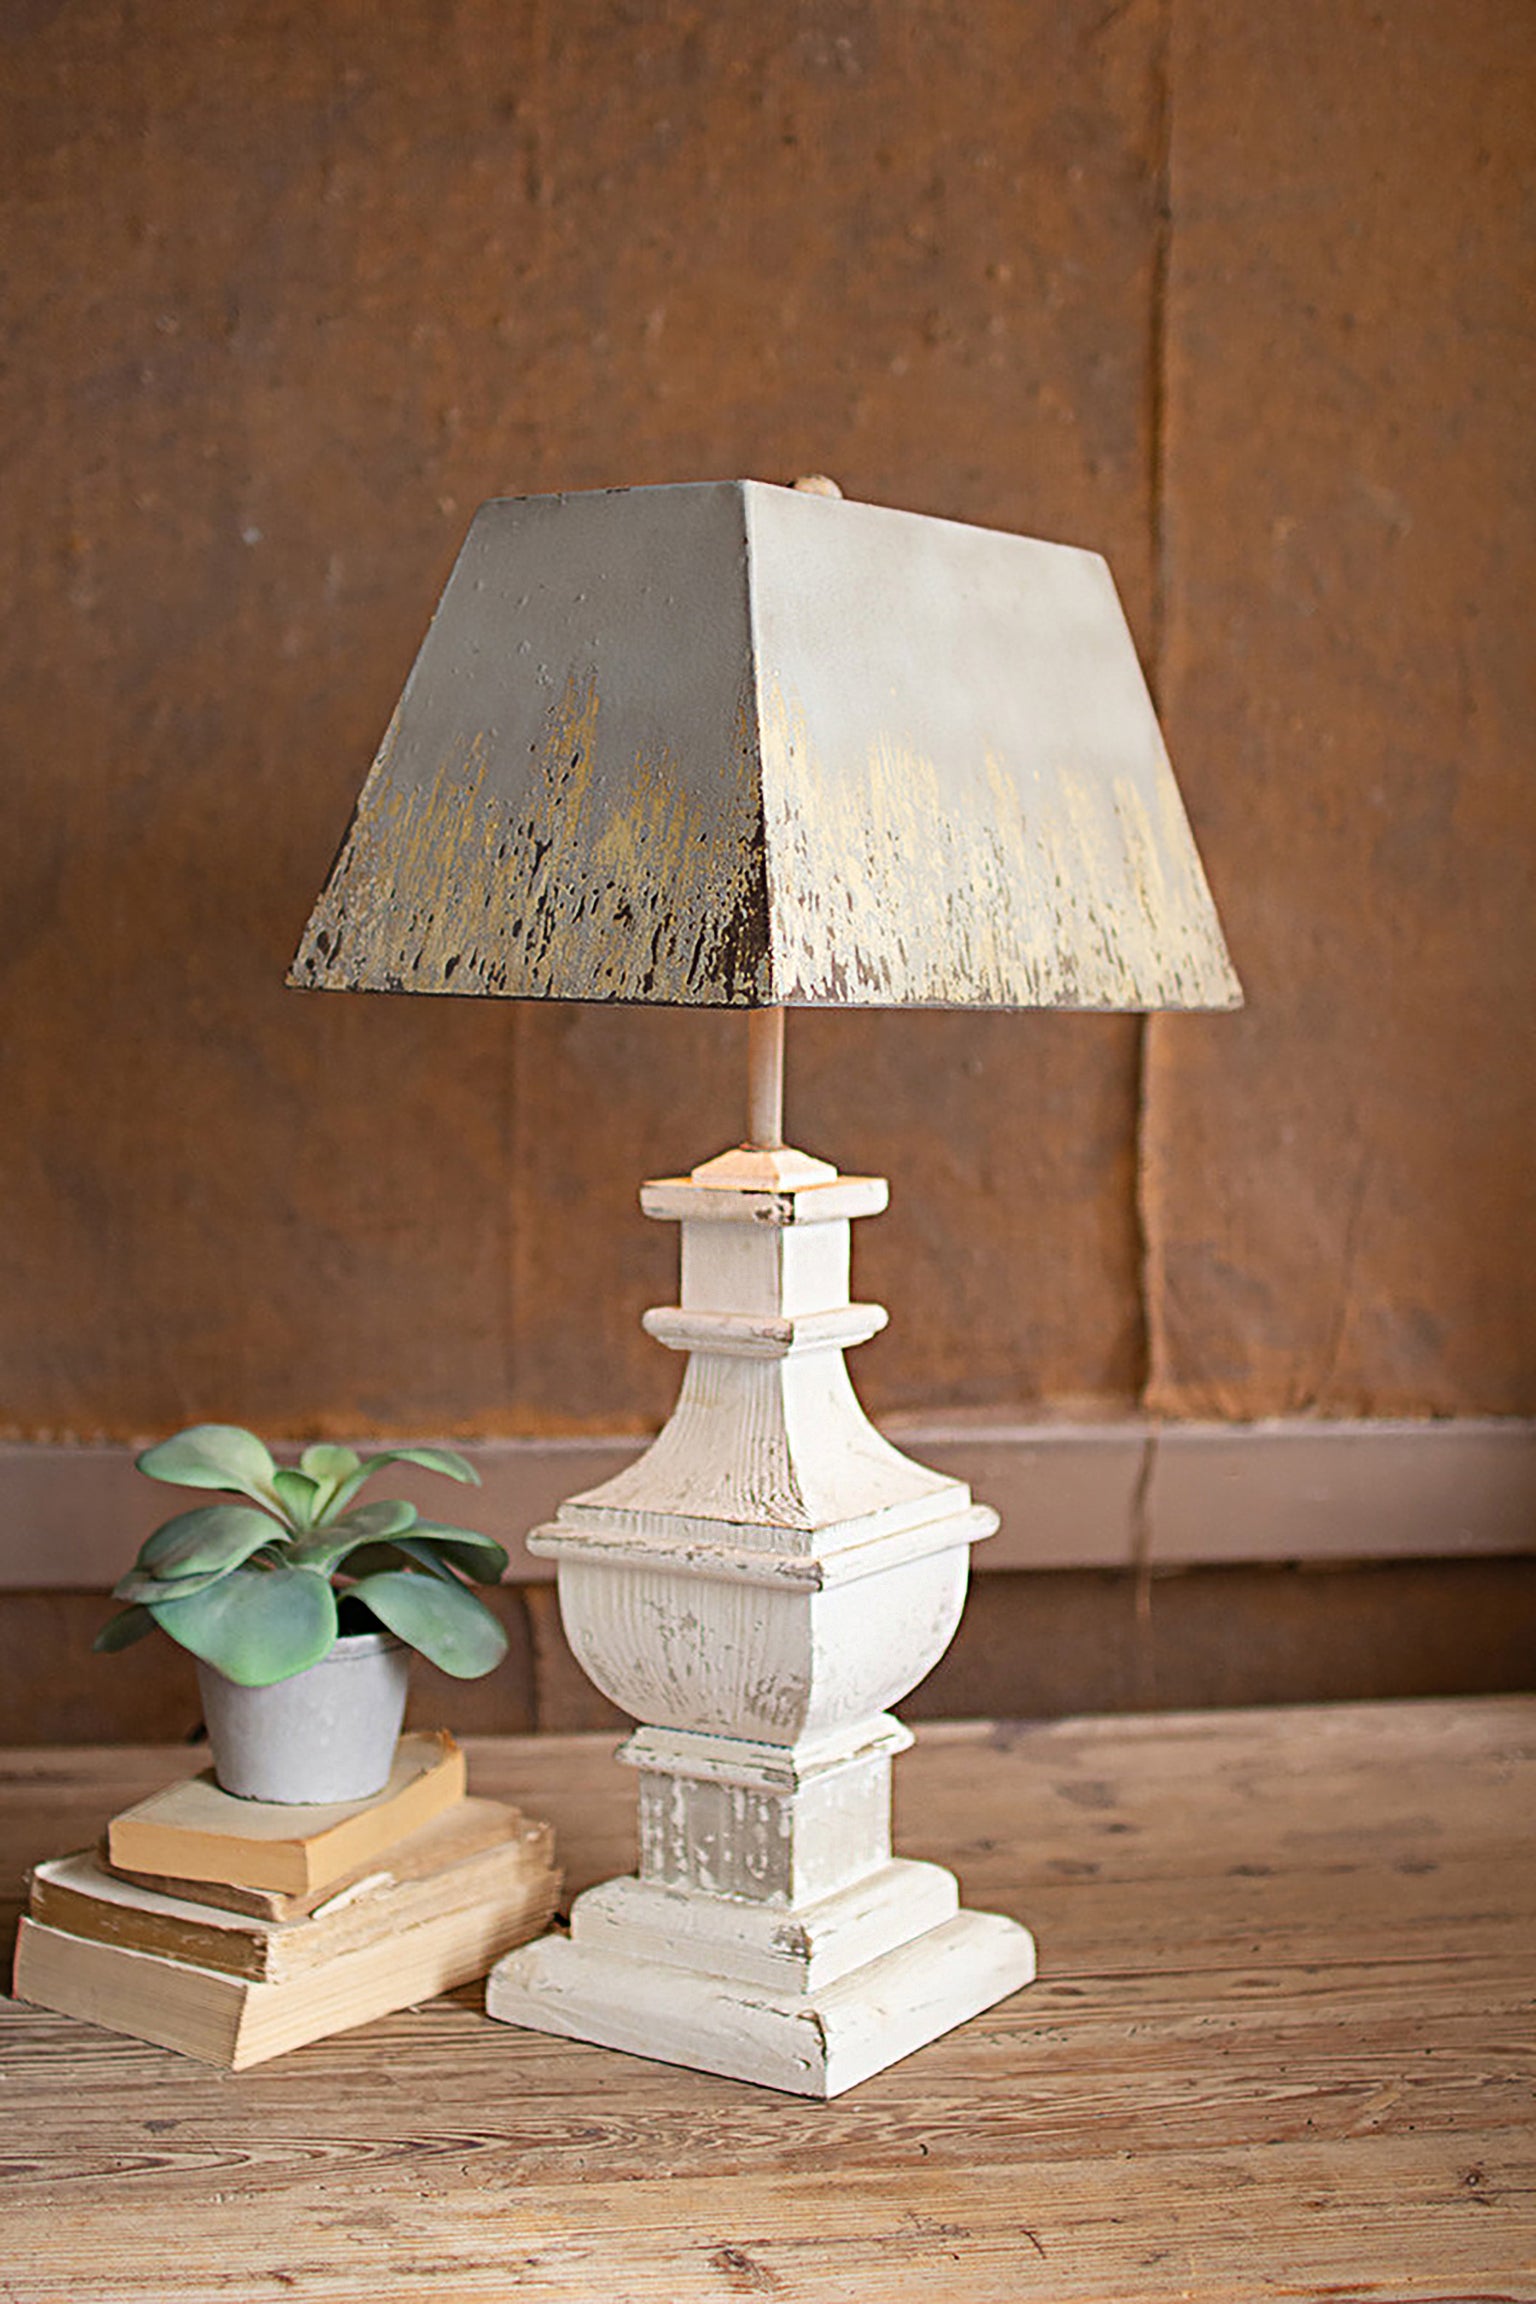 Rustic White Wood Cottagecore Table Lamp With Metal Shade